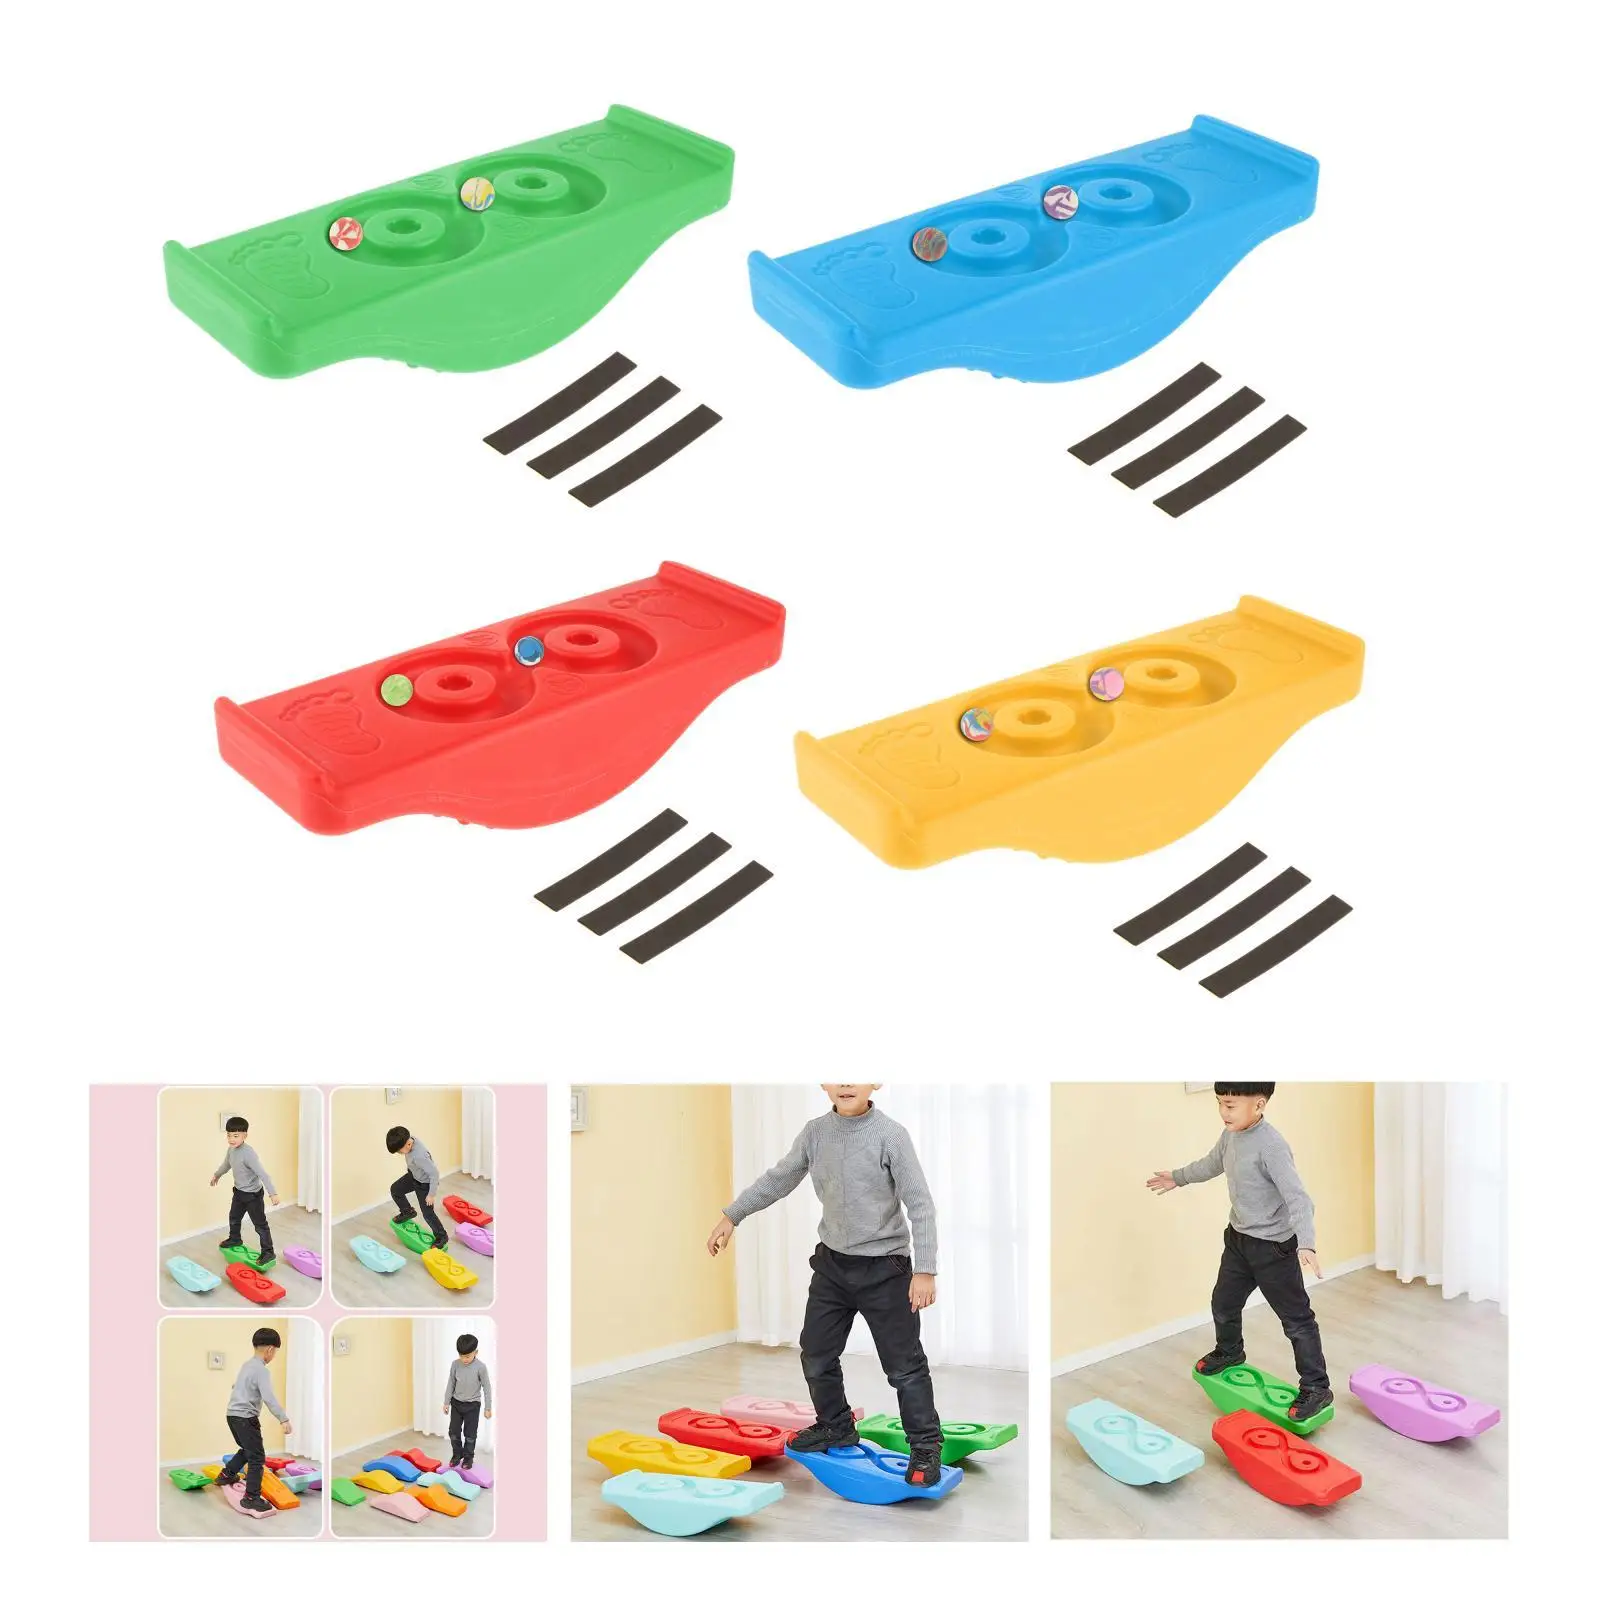 Balance Board Sensory Play Indoor Outdoor Games Rocking Seesaw Fitness Sport Stability Exercise Garden Kids Children Workout